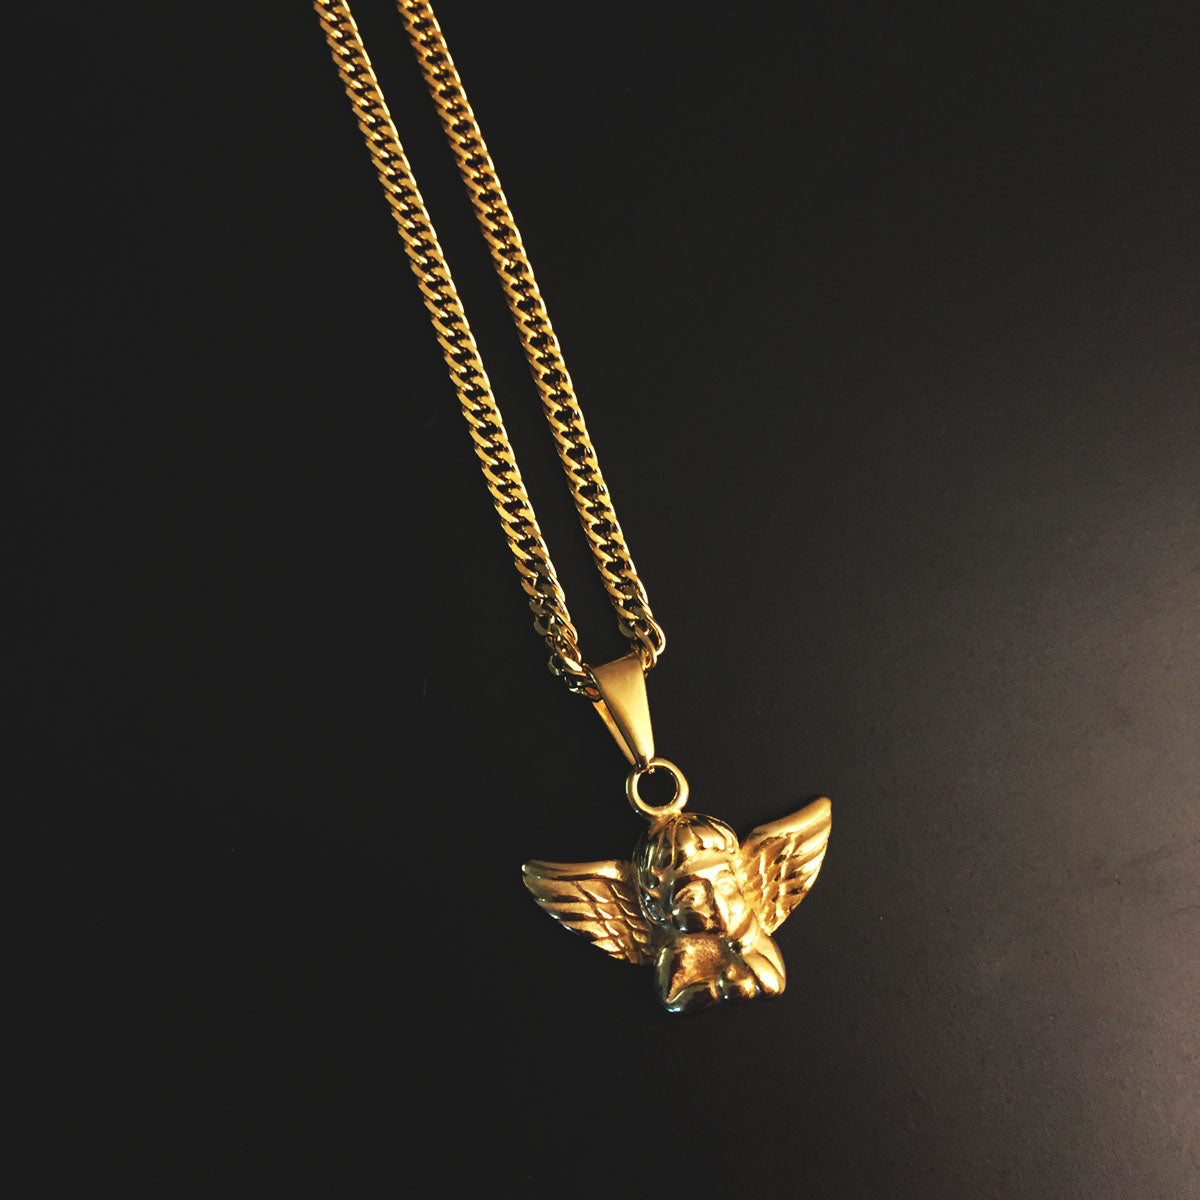 Mini Cherub - Necklace - Cold Gold Mens Gold Urban Contemporary Hiphop Jewelry